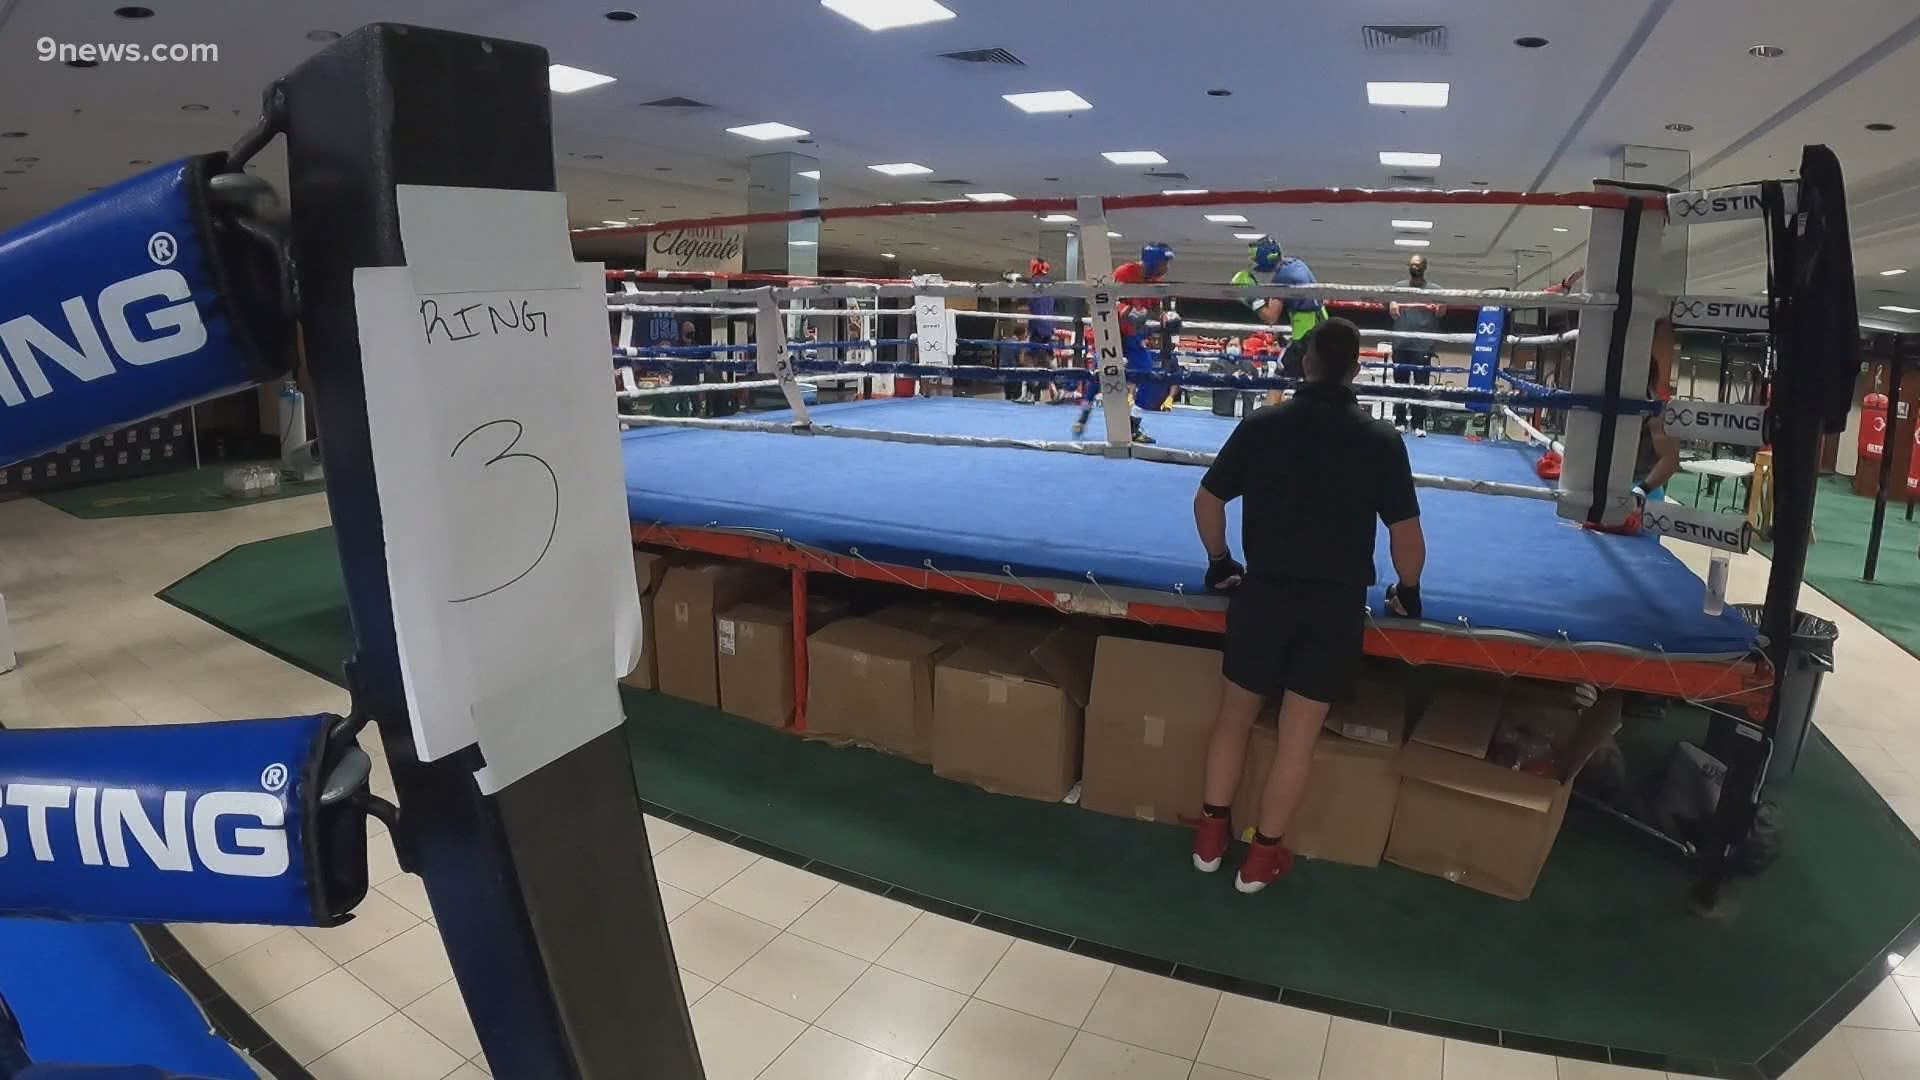 The pandemic means USA Boxing can’t train at the Olympic Training Center,  so they set a gym up in an abandoned department store at the Citadel Mall.